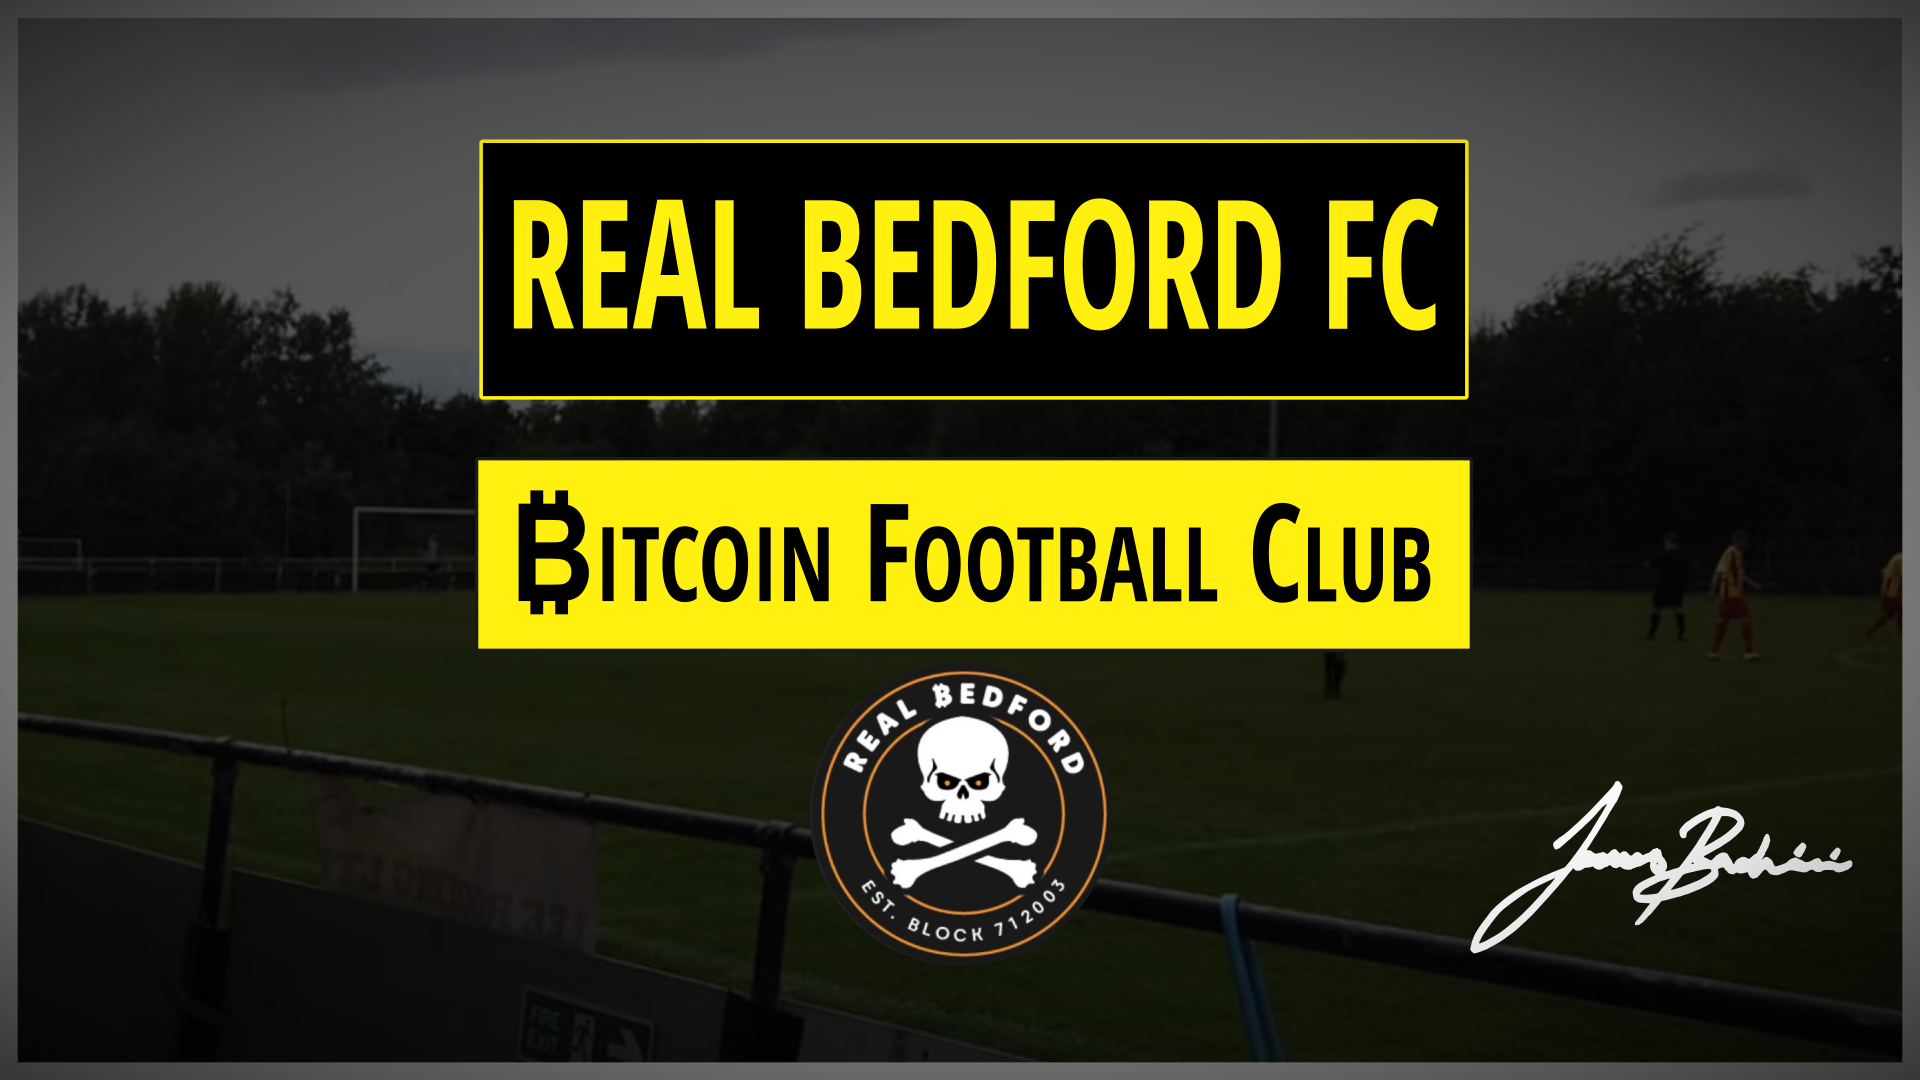 Real Bedford FC | The ₿itcoin Football Club Story